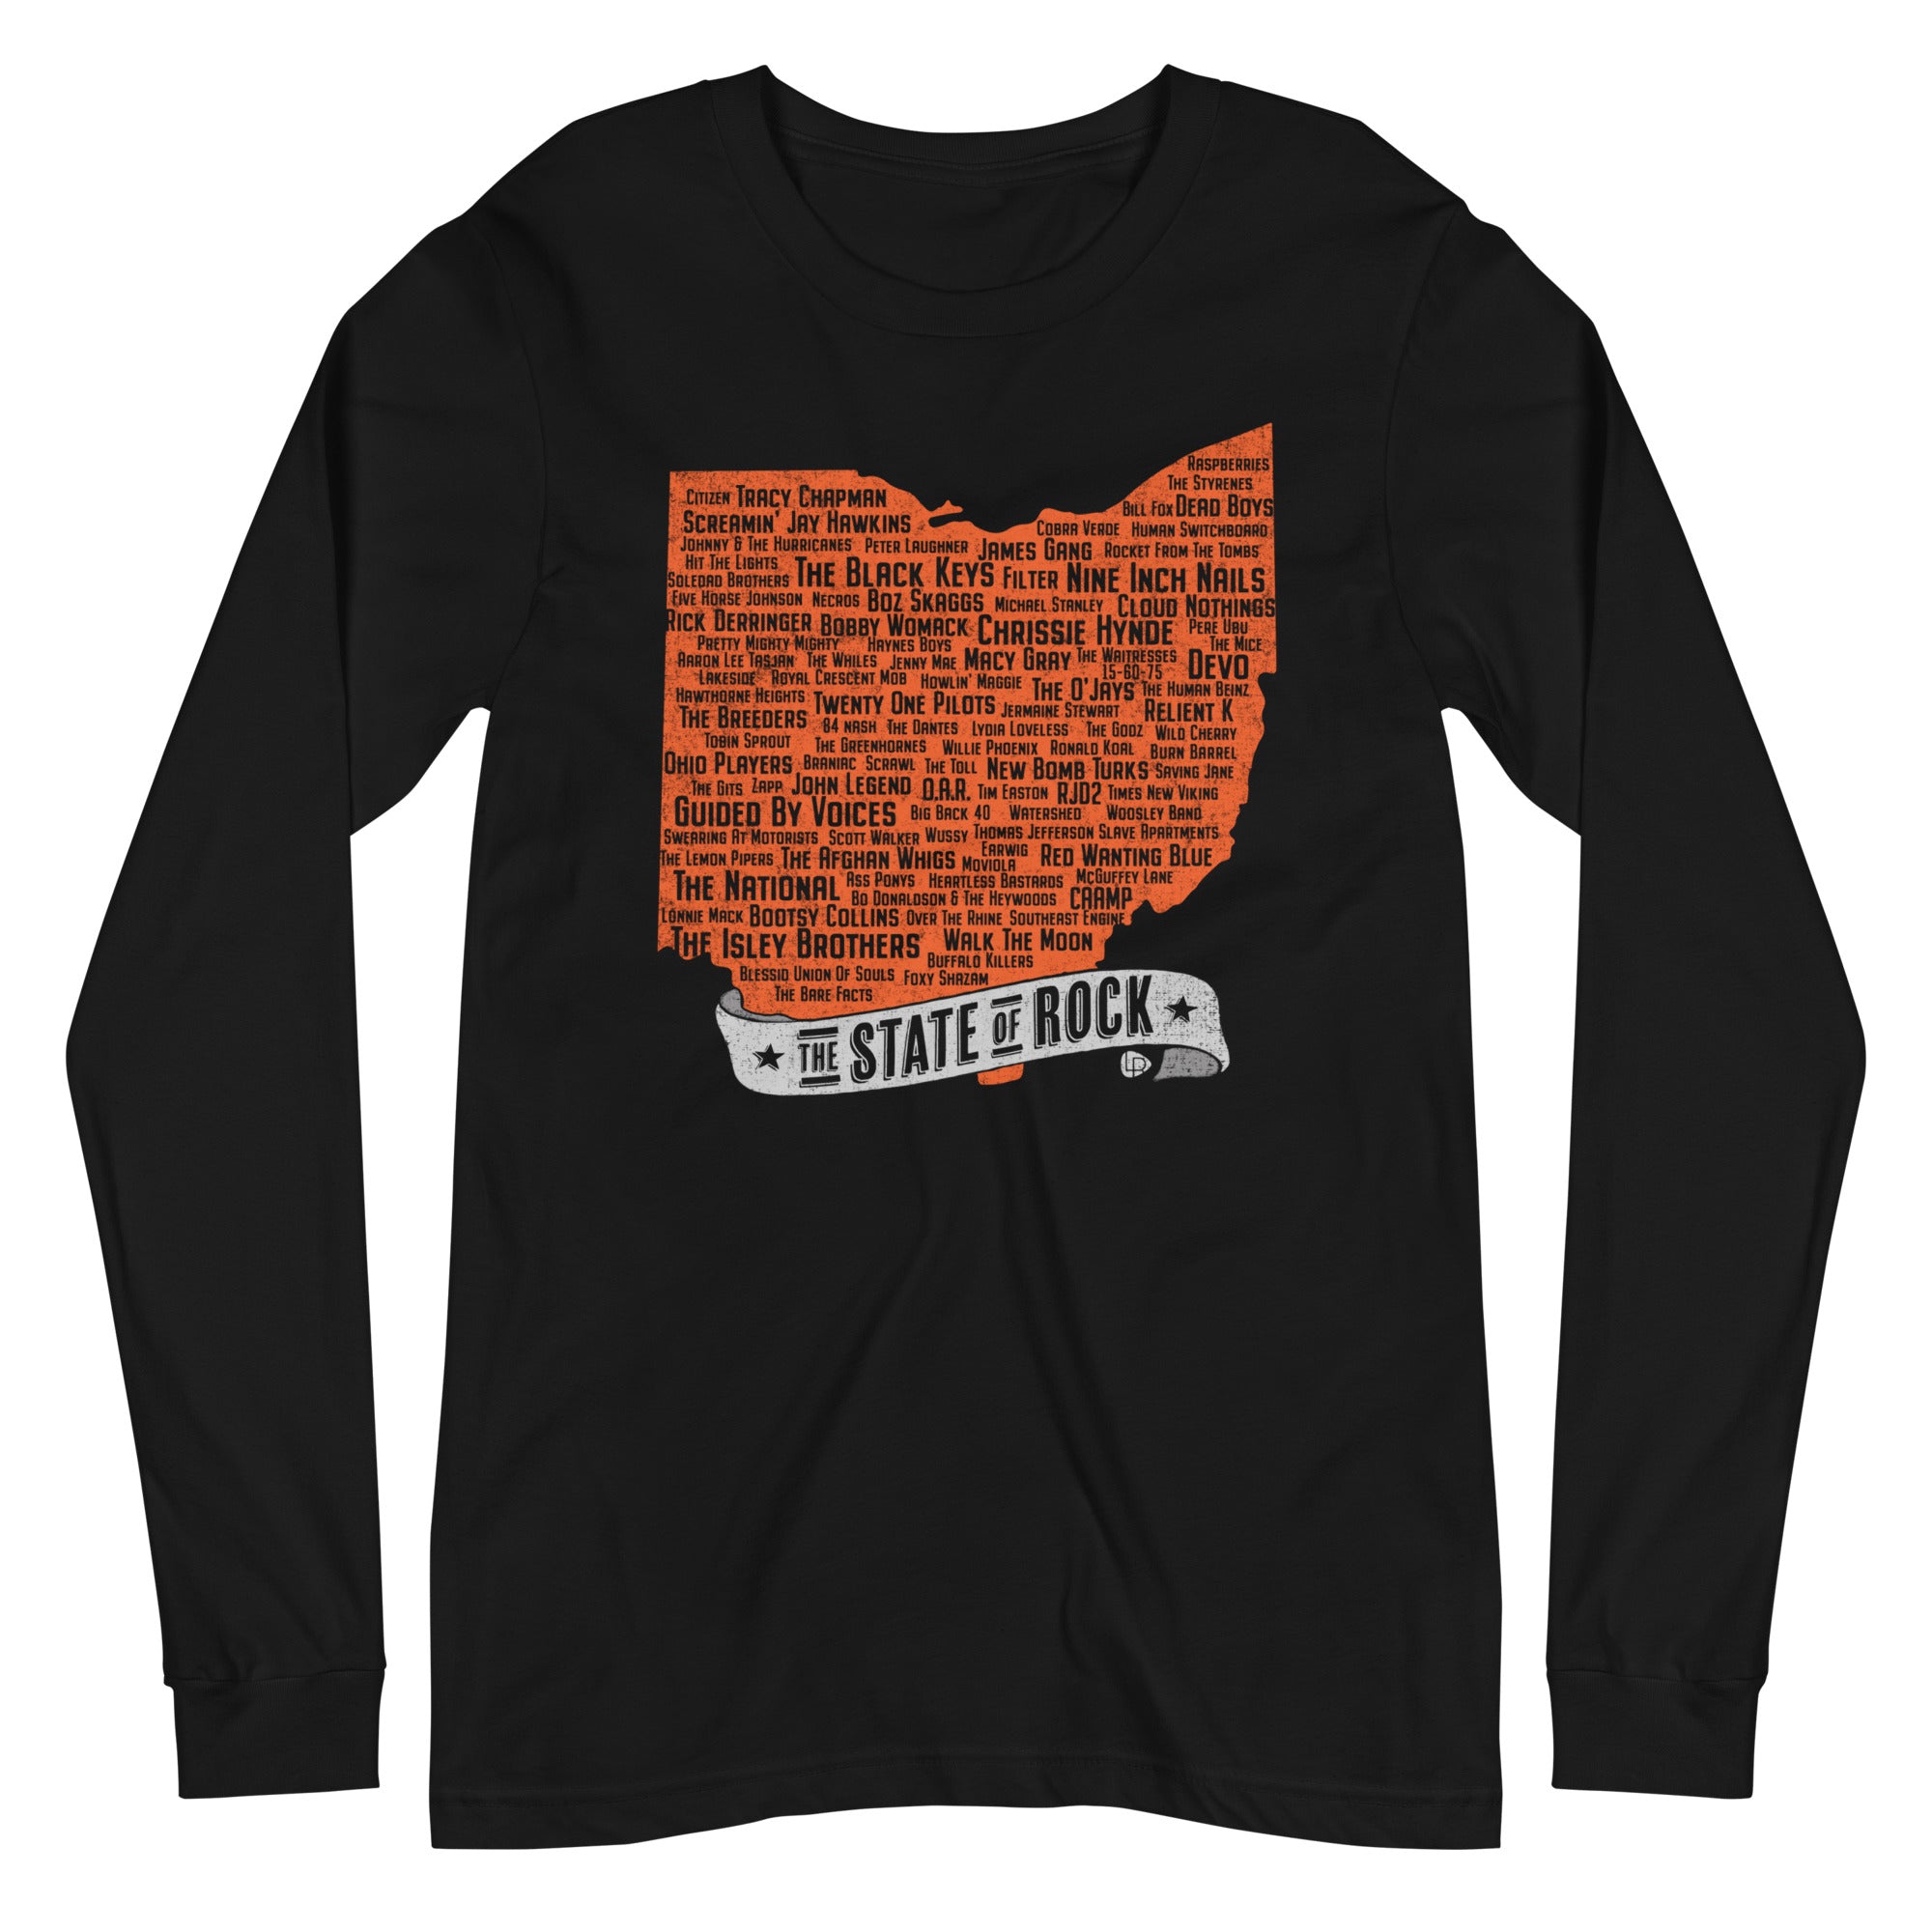 Let's Go Cardo Louisville Hoops shirt - Limotees